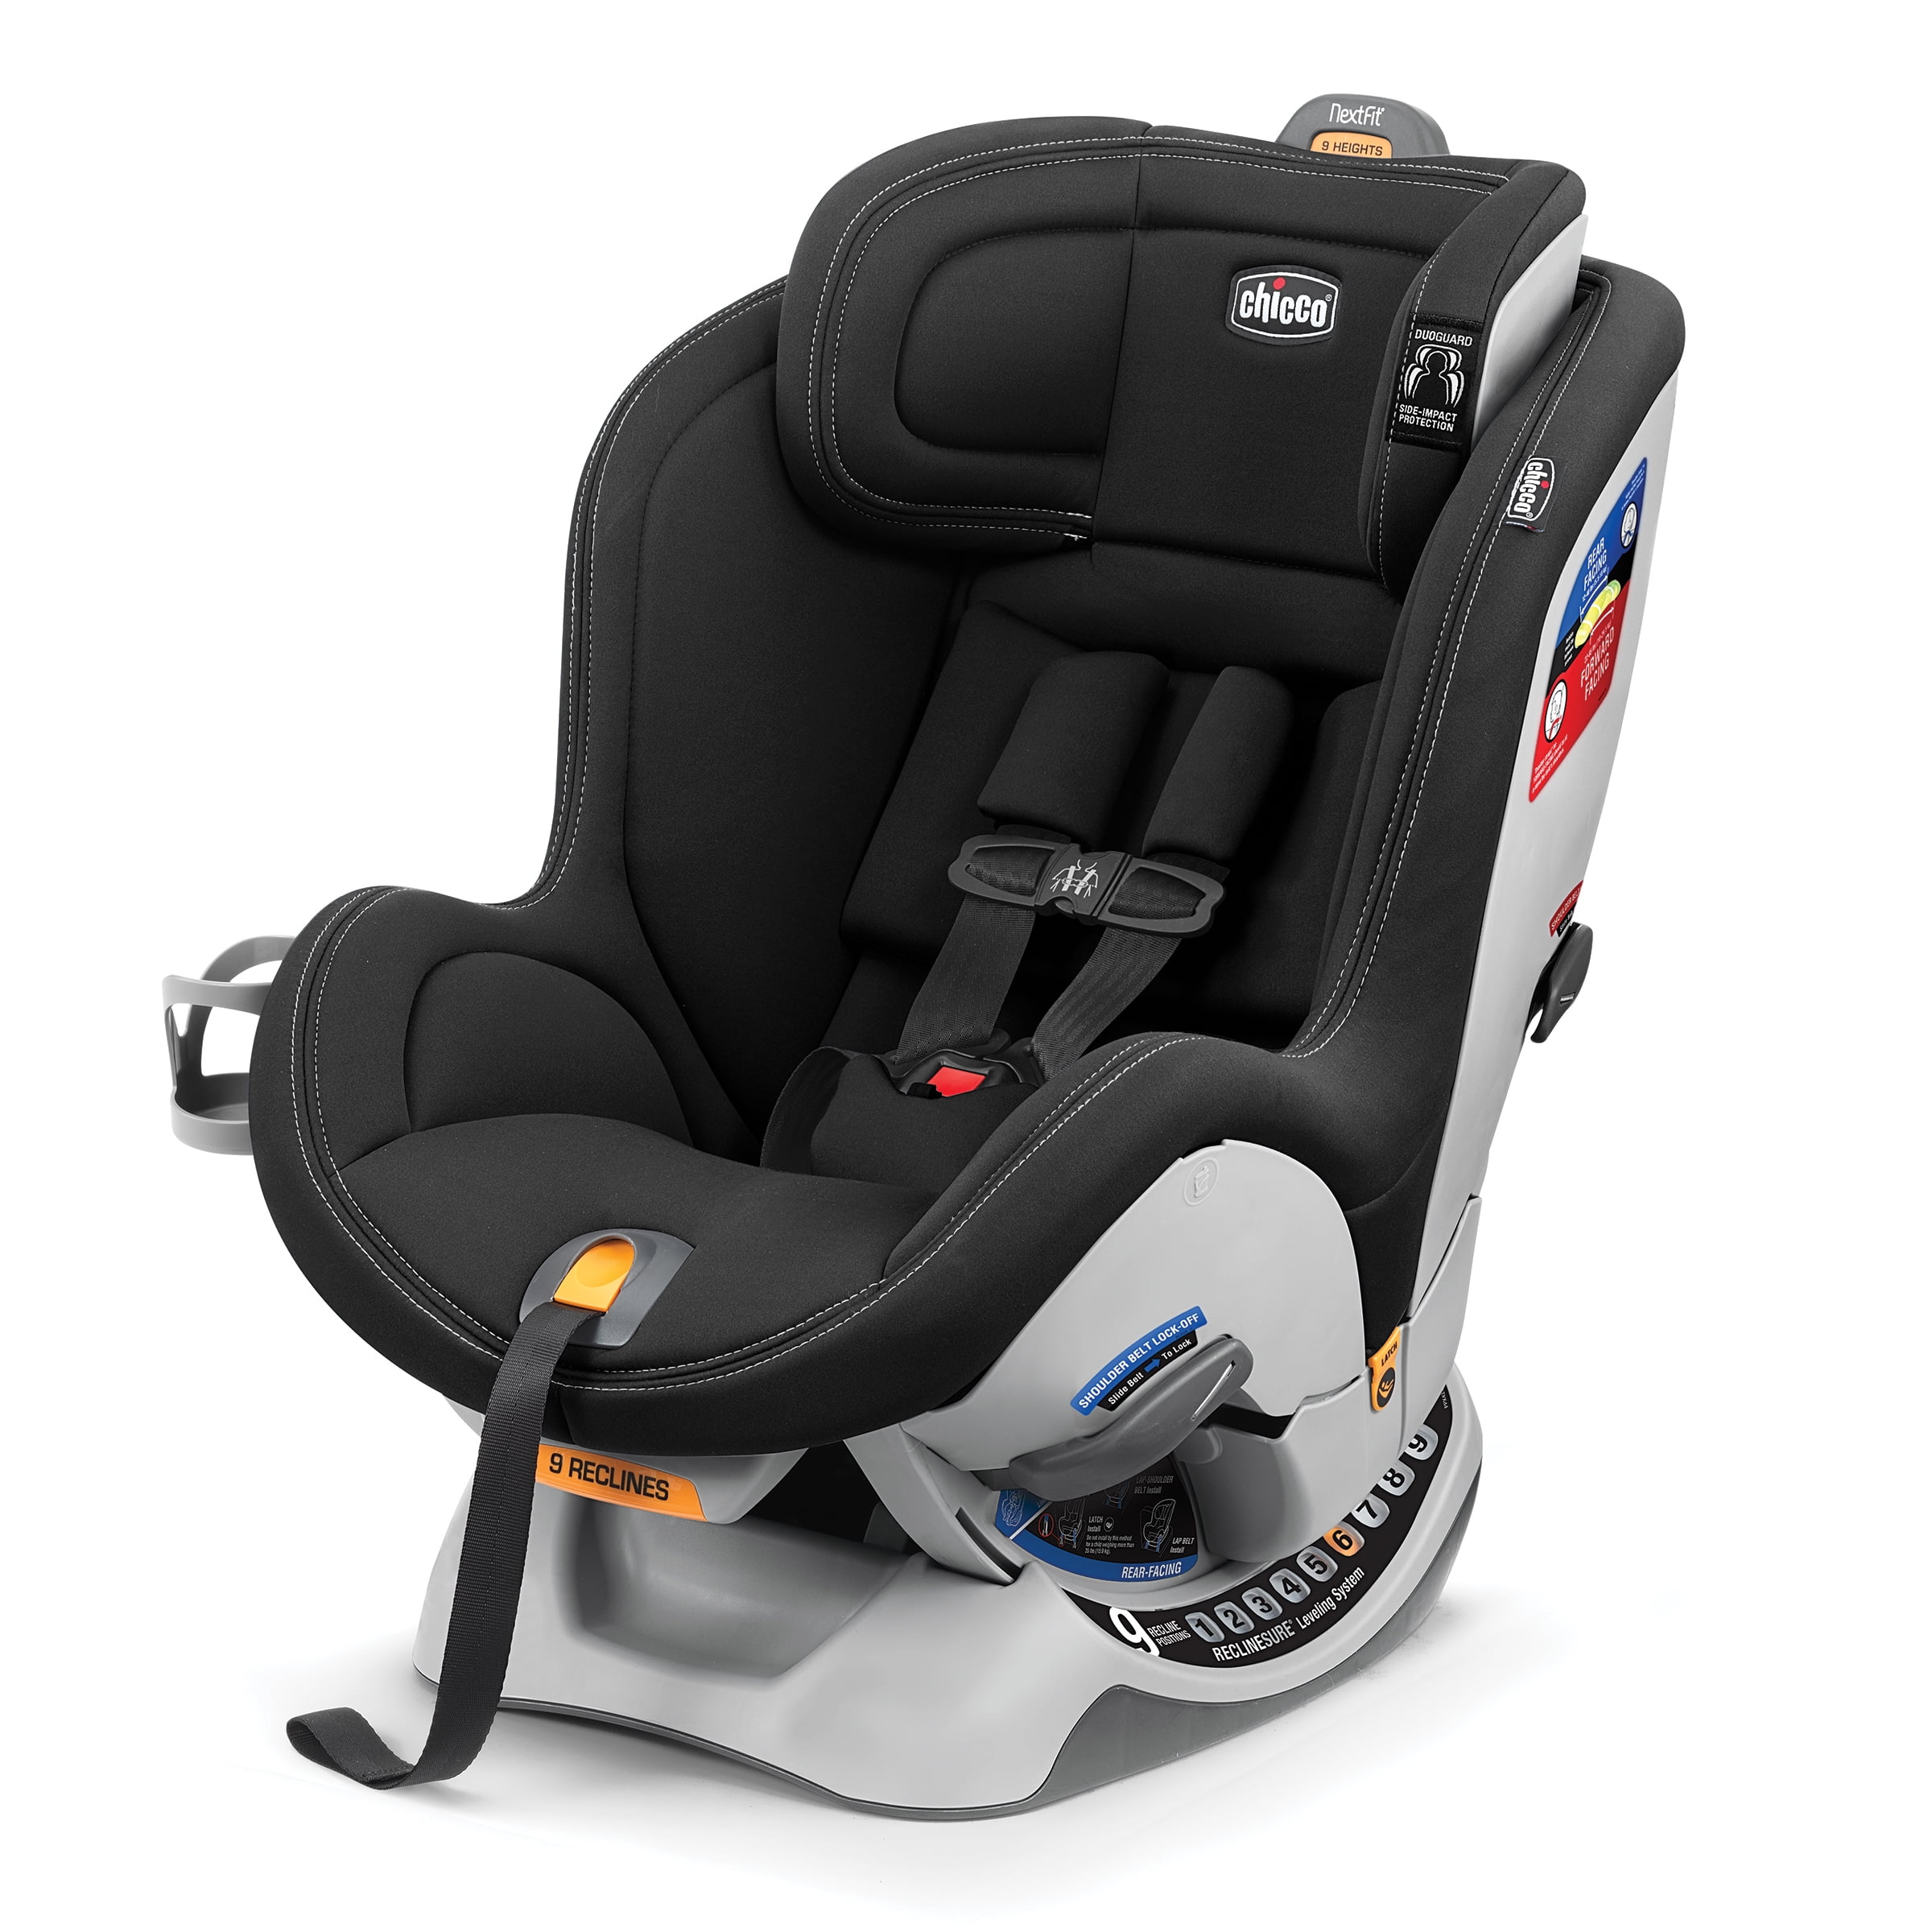 a well rated car seat price